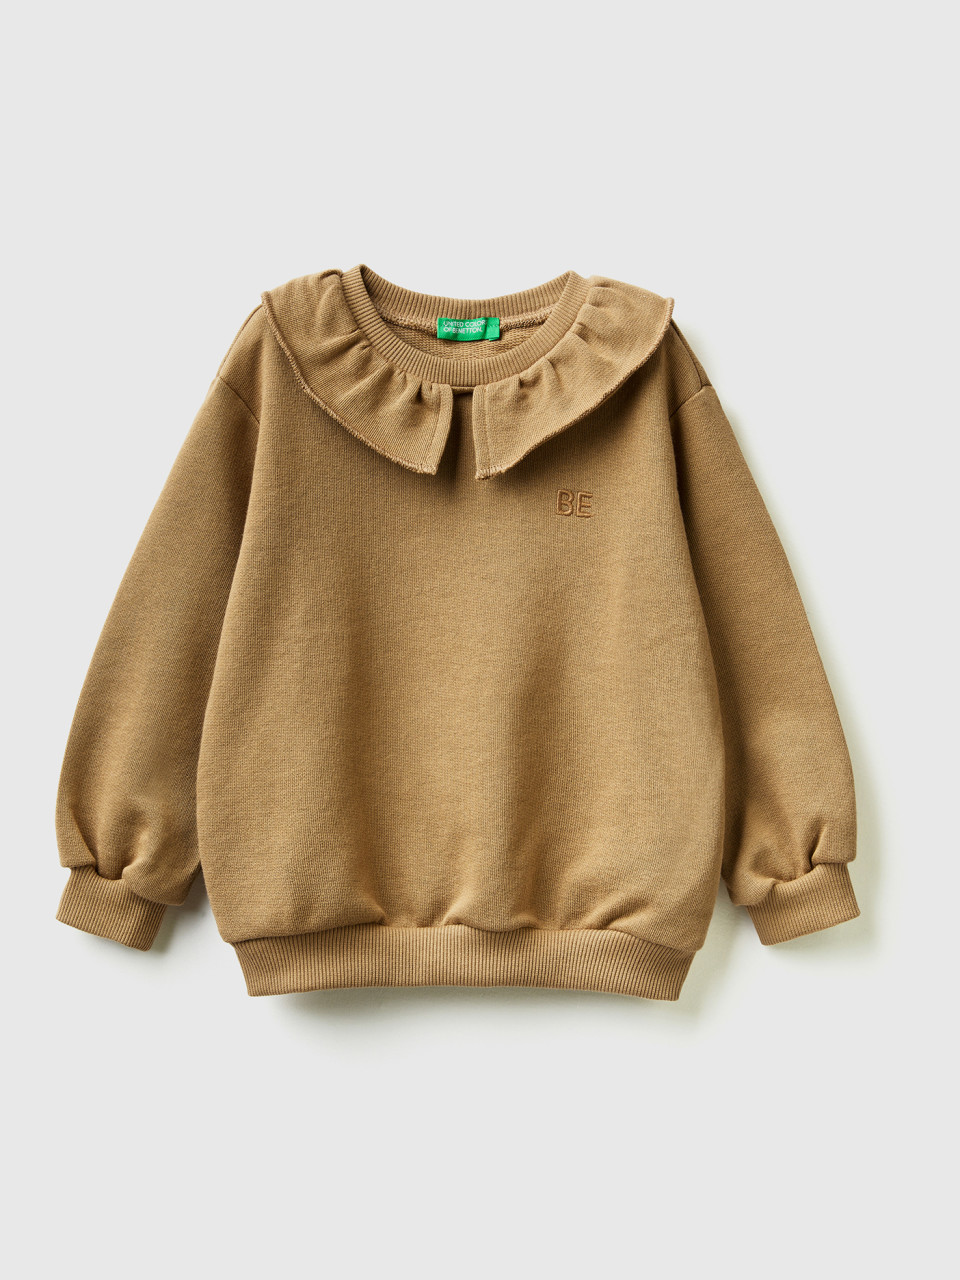 Benetton, Sweatshirt With Collar And be Embroidery, Camel, Kids